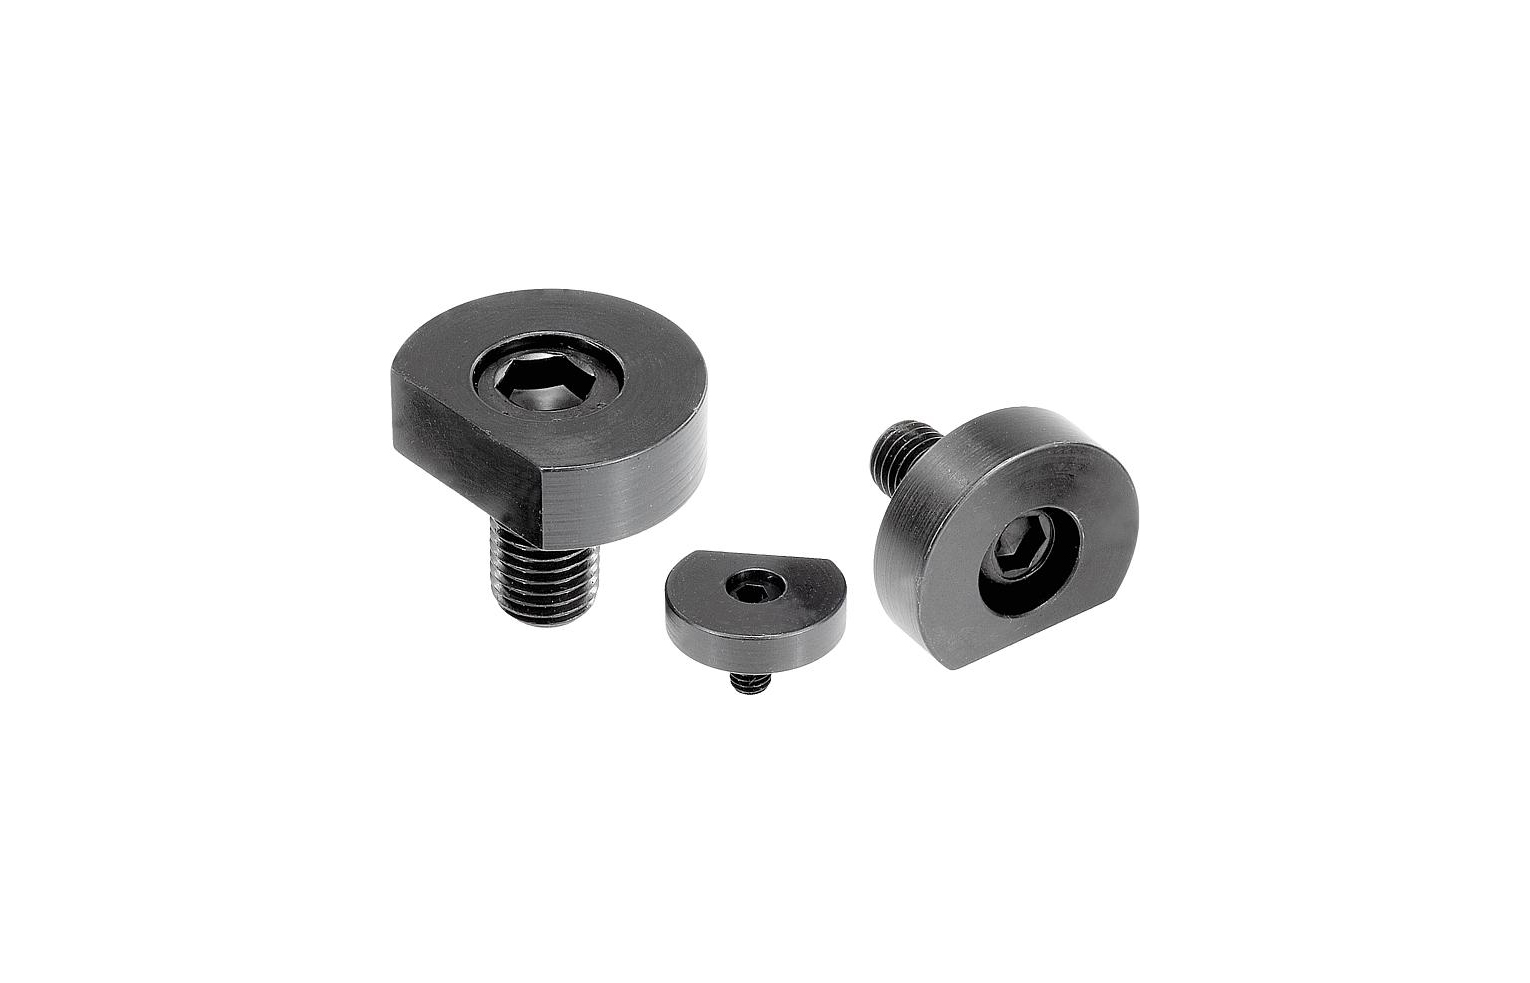 K0022 Fixture clamps machinable